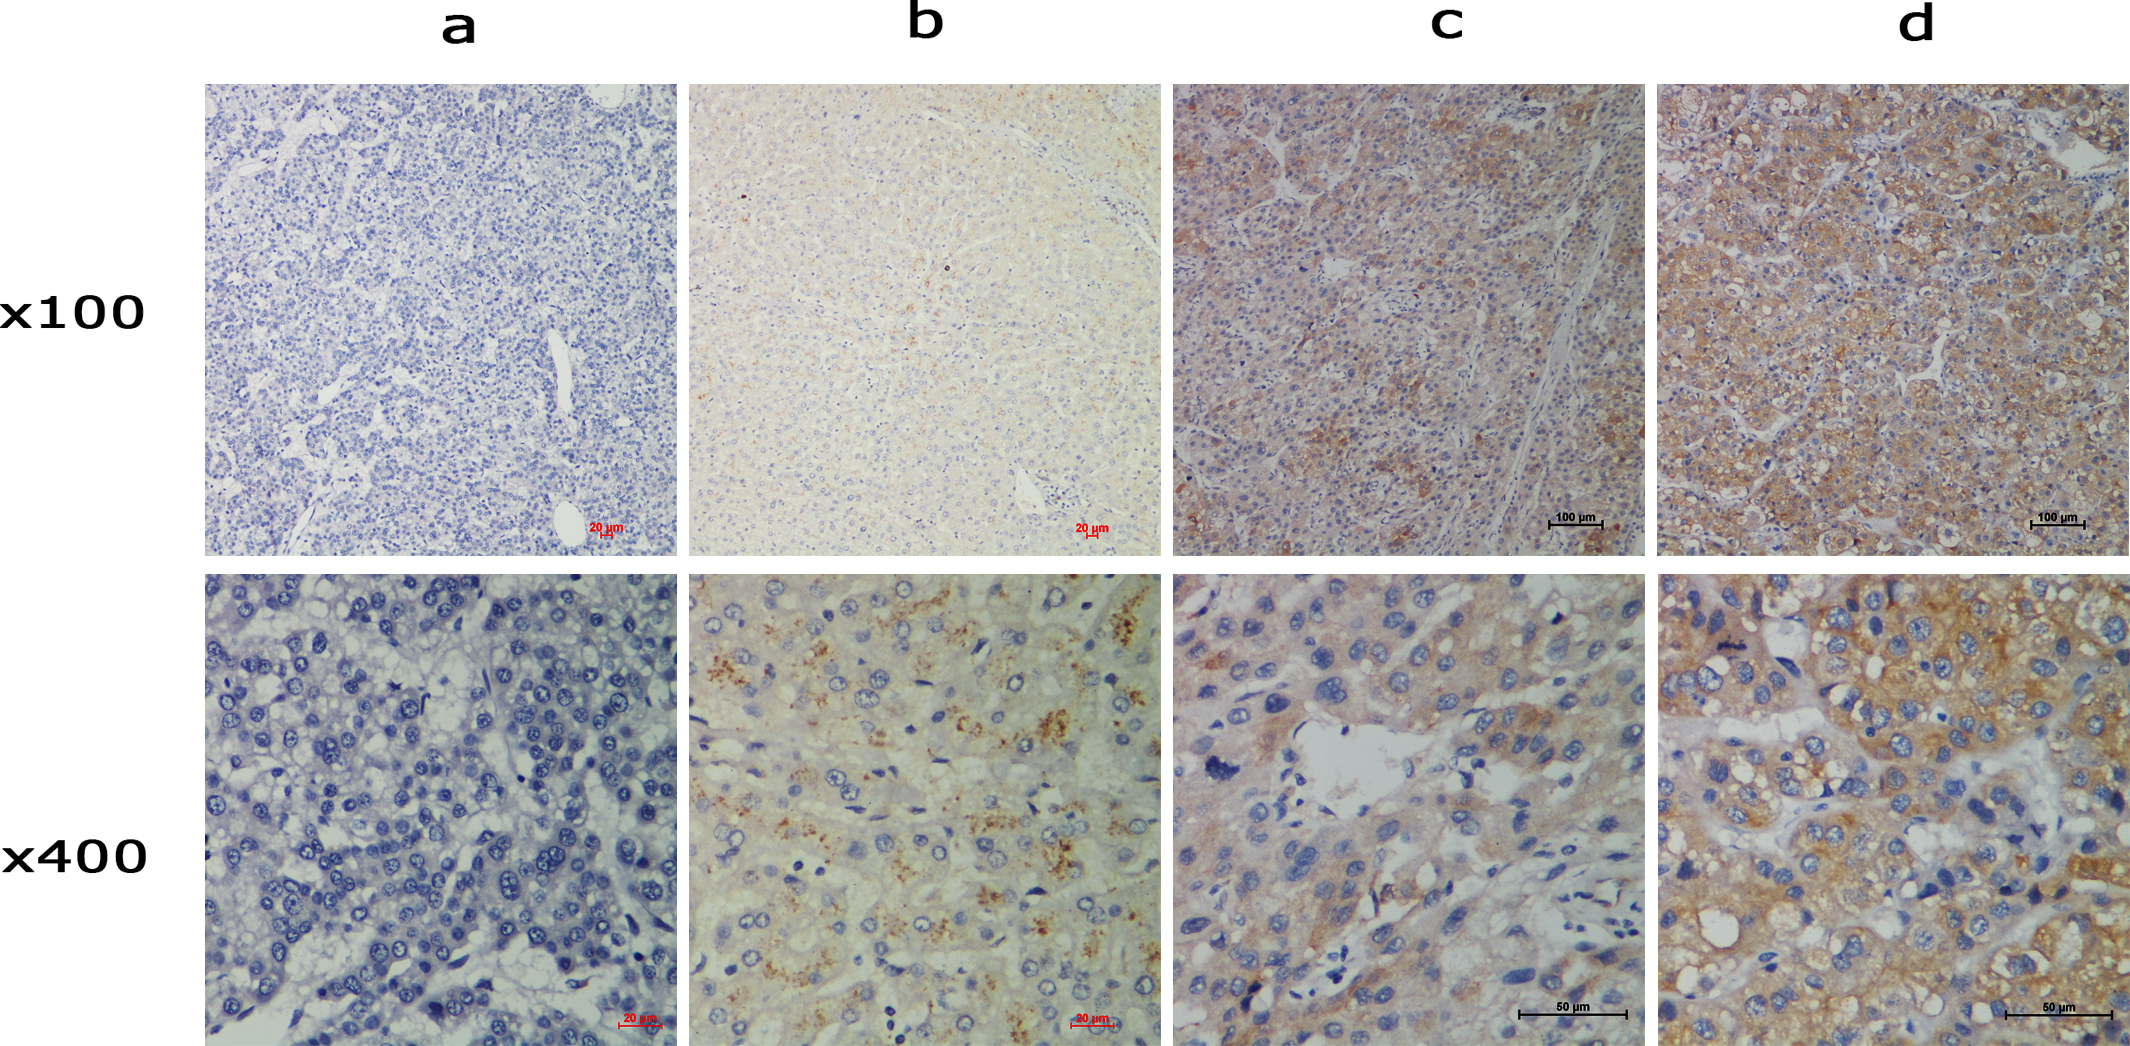 Expression of TACC2 in HCC tissues by immunohistochemistry staining. (a) negative staining, (b) weak staining, (c) moderate staining, and (d) strong staining (original magnification, x100 and x400).